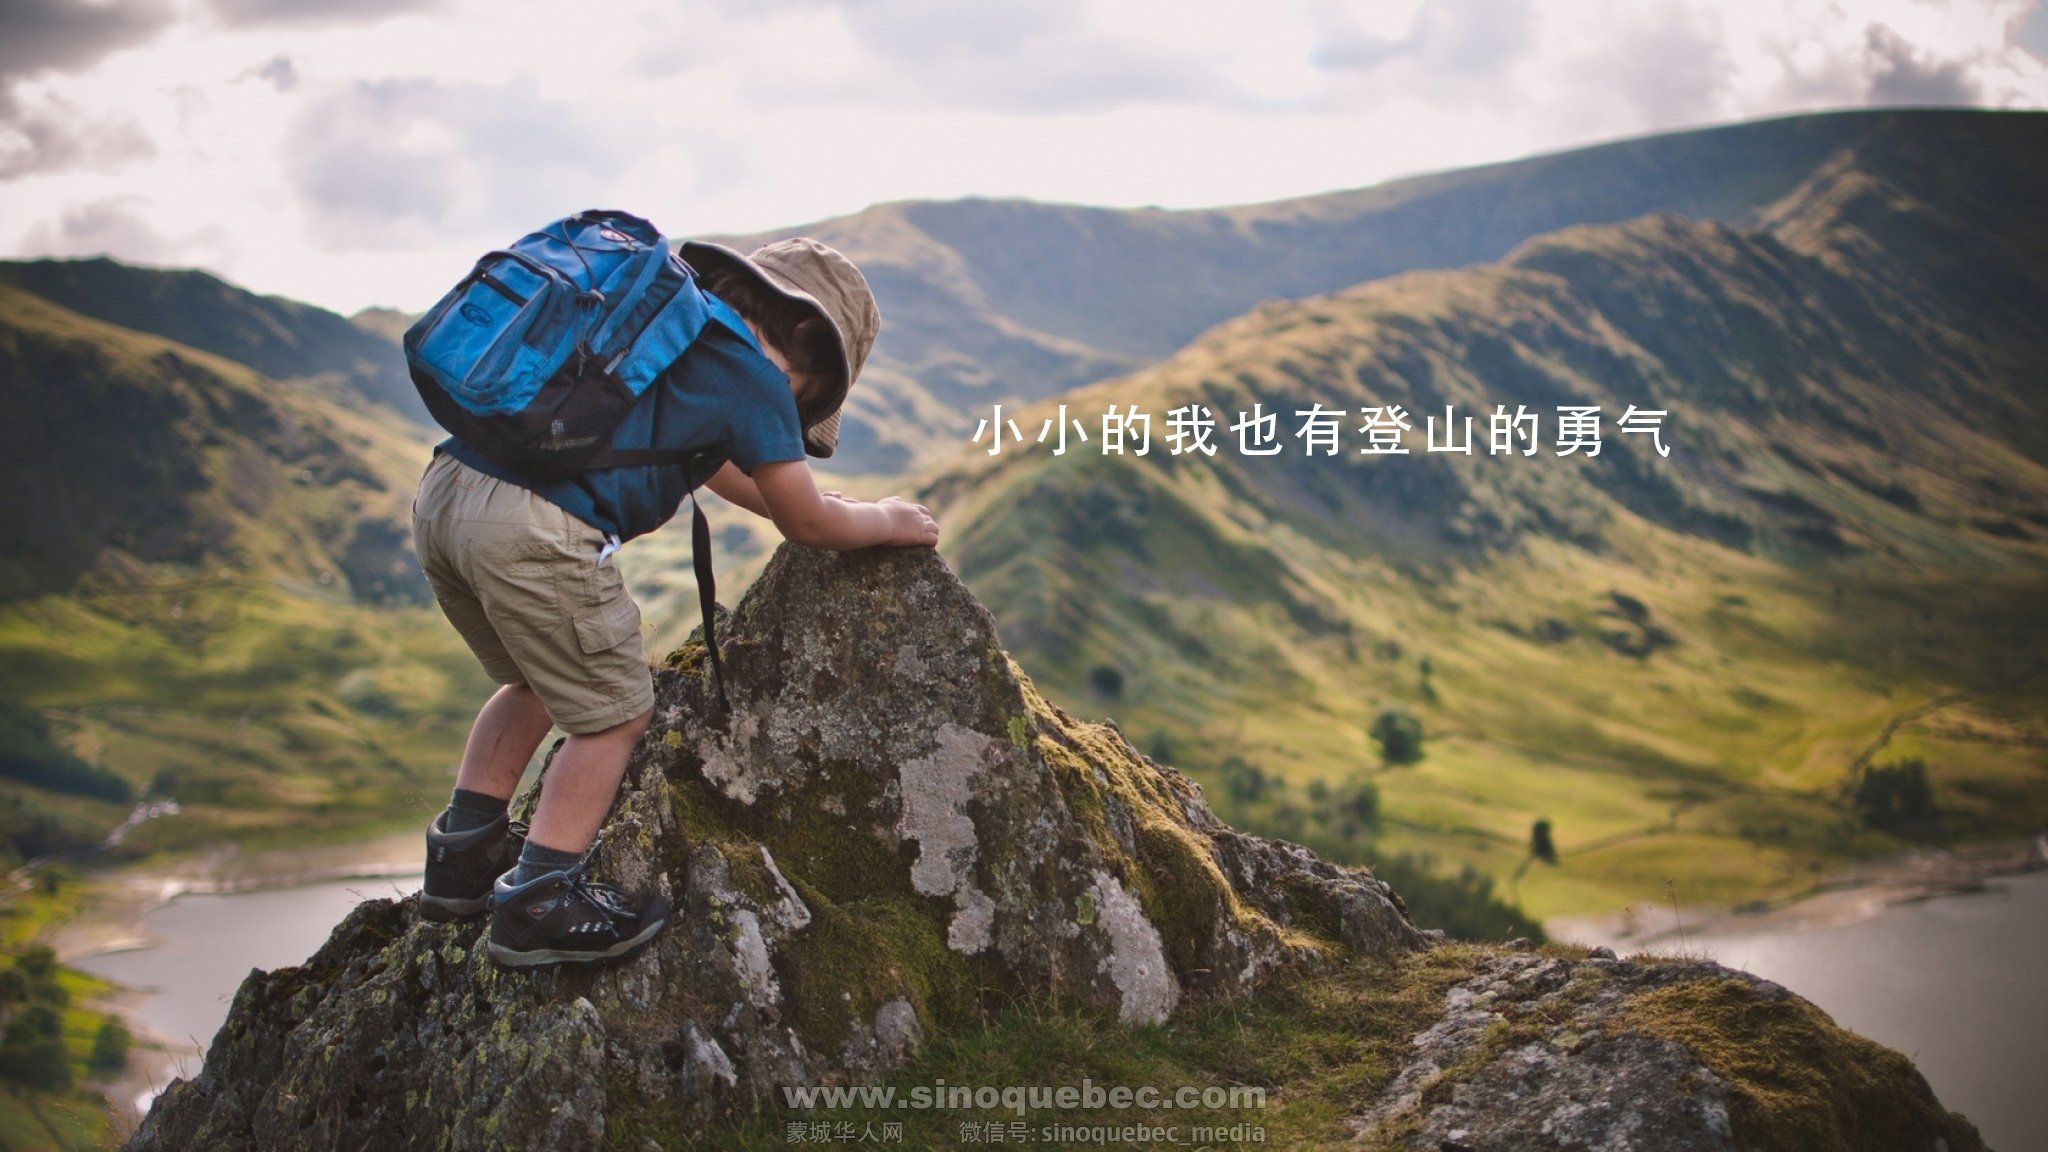 child_backpack_mountains_travel_nature_2.jpg